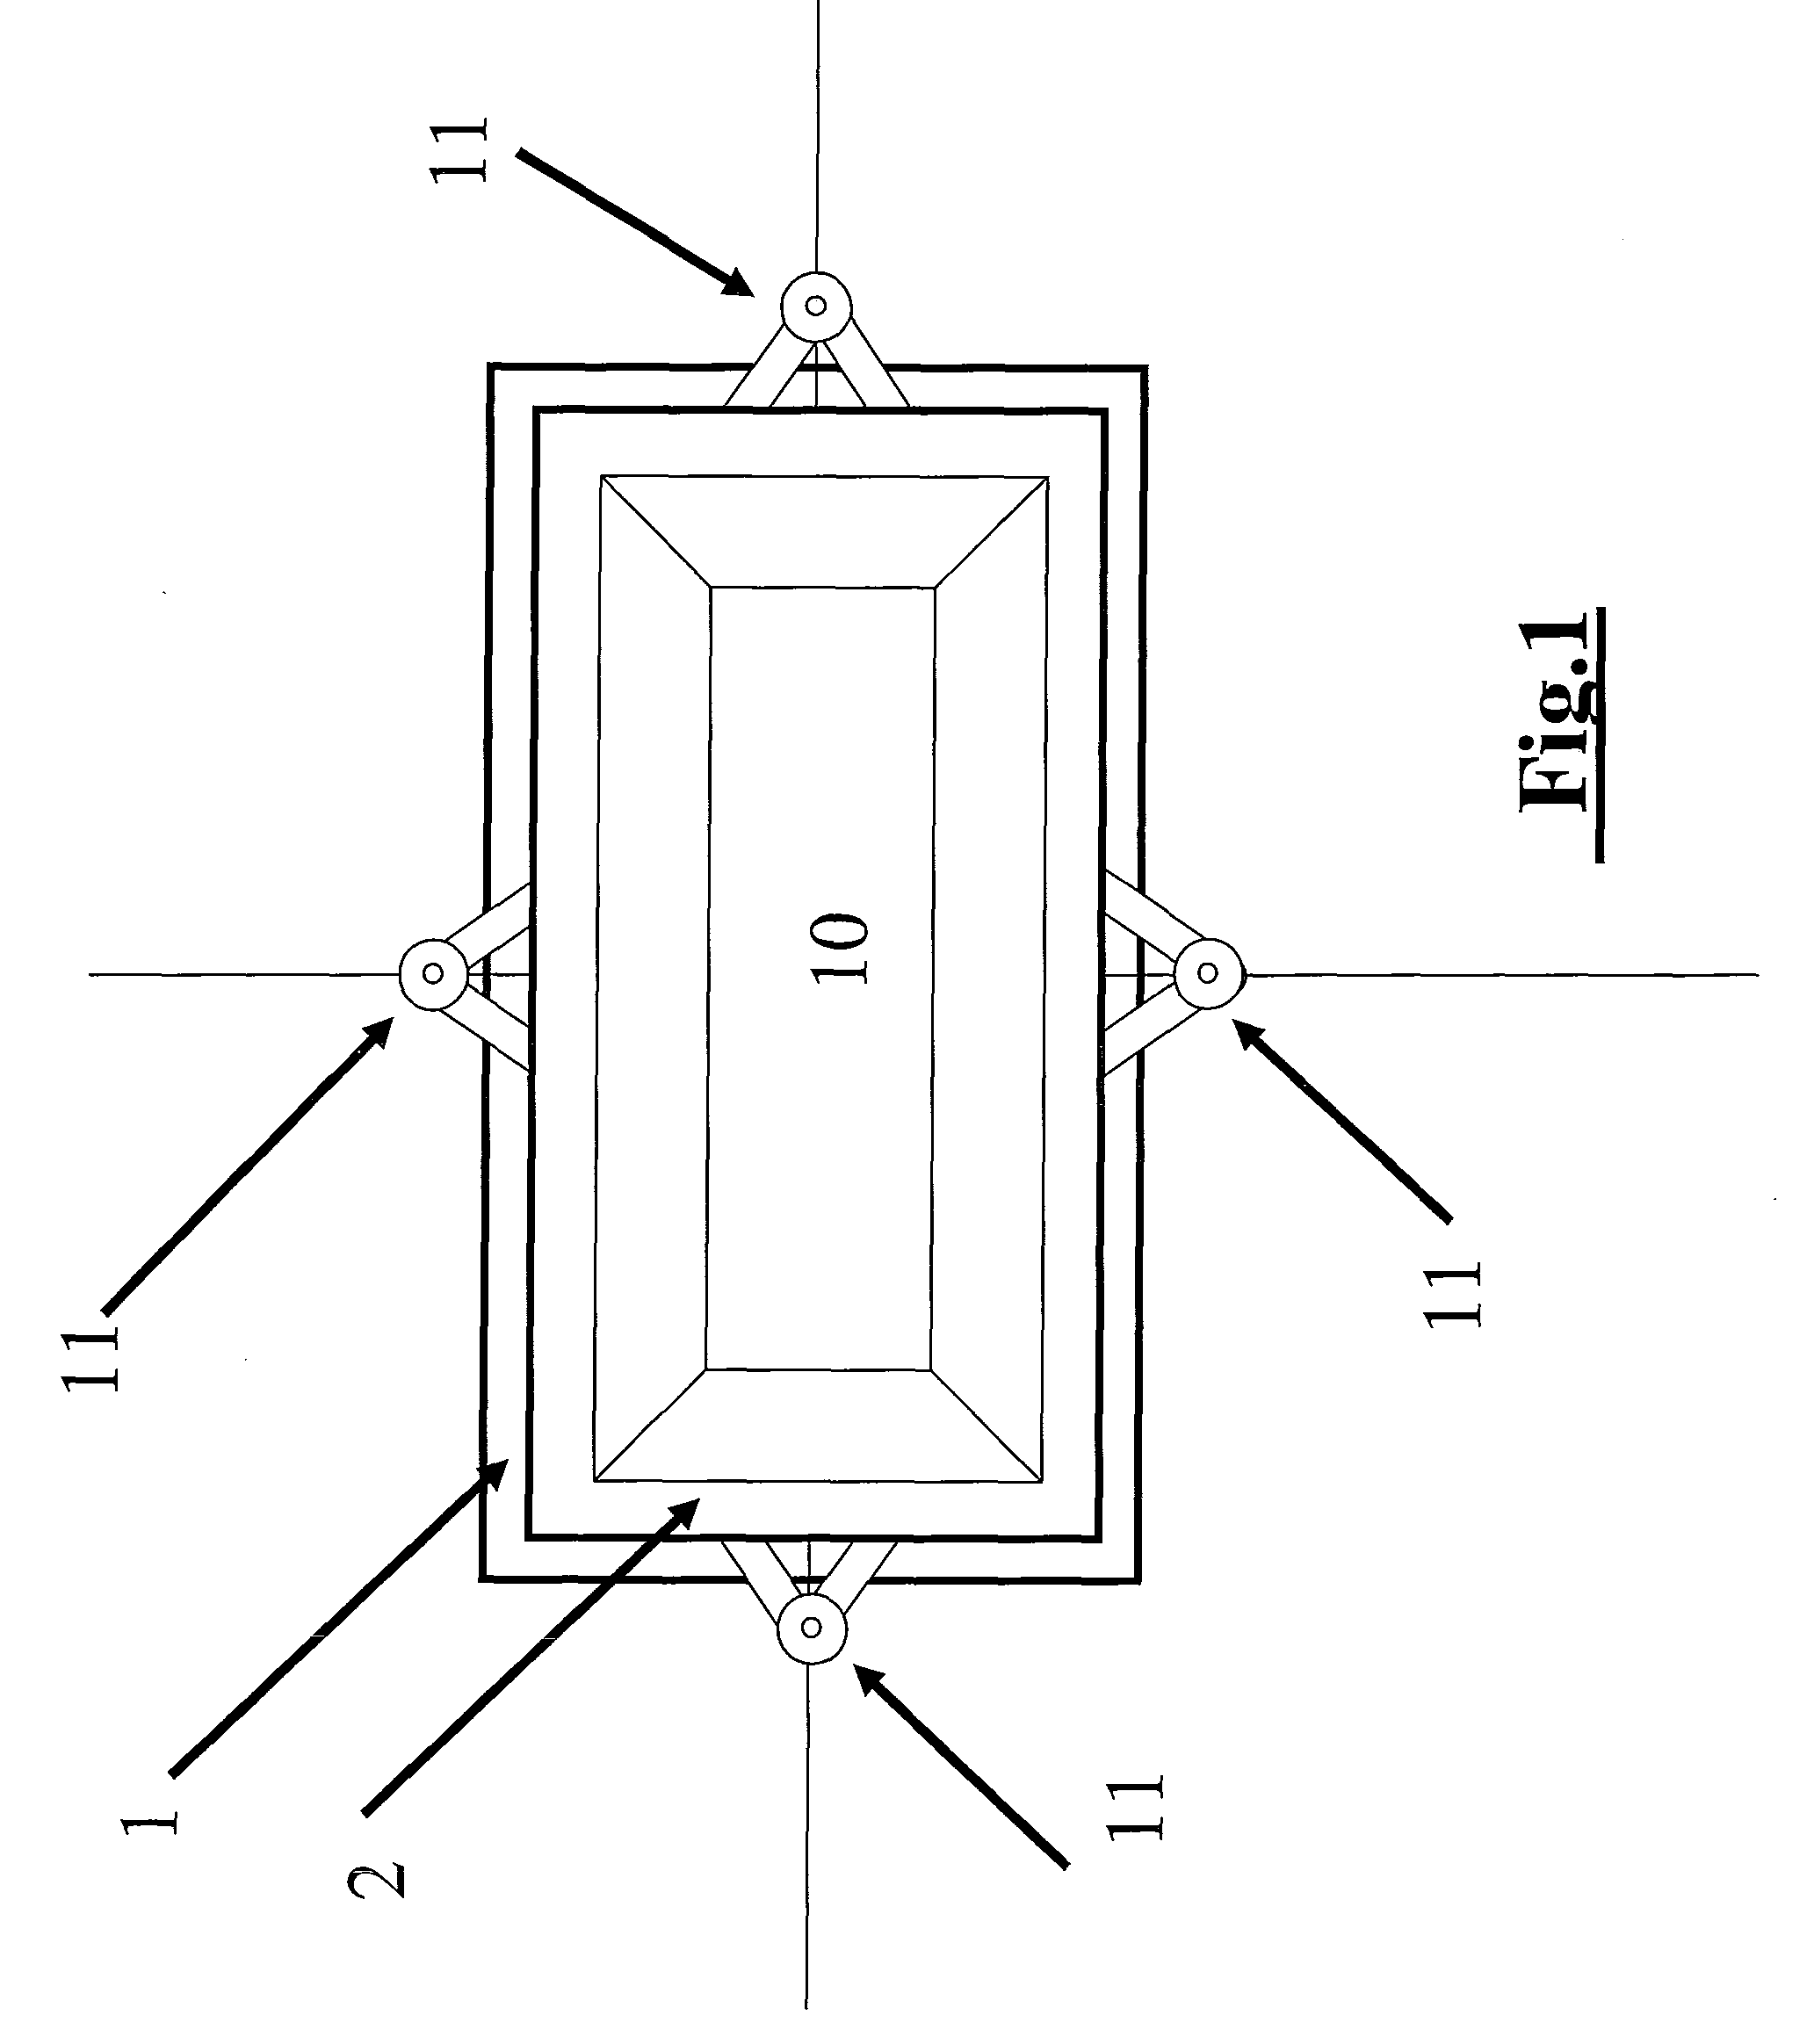 Frictional damper for damping movement of structures